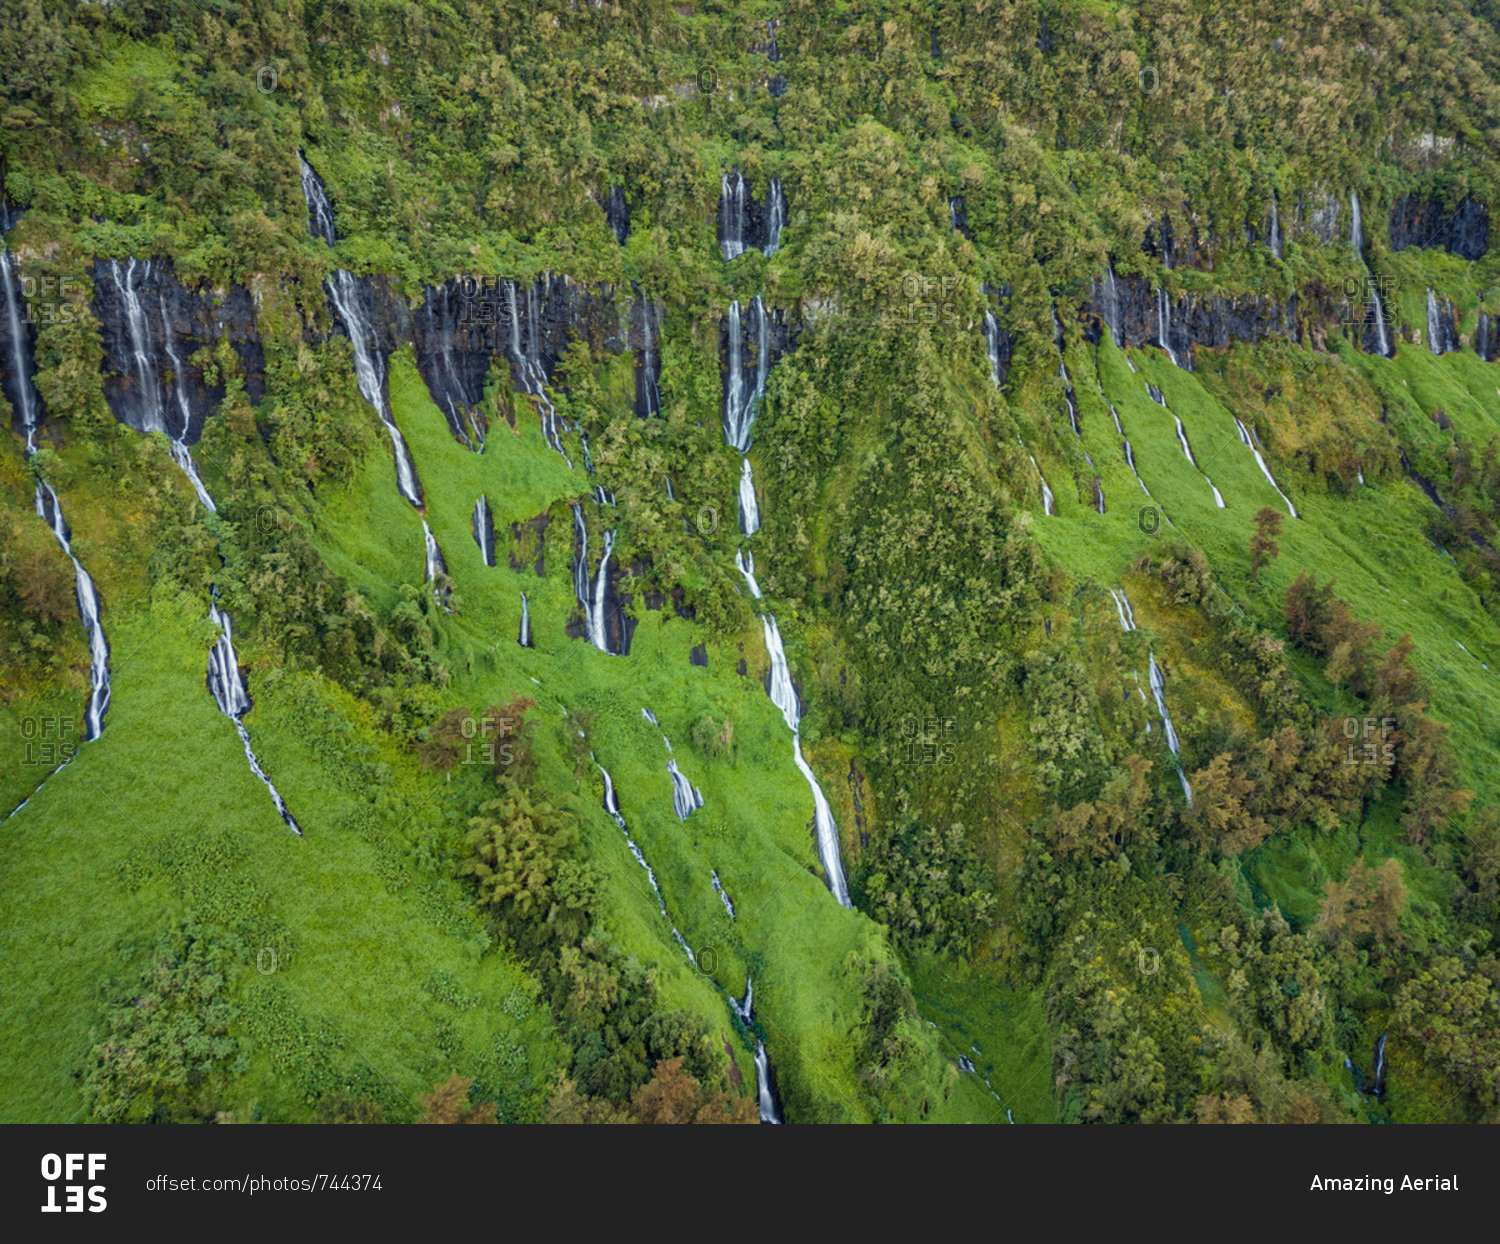 Aerial view of Voile de la Mariee waterfall, Reunion island.